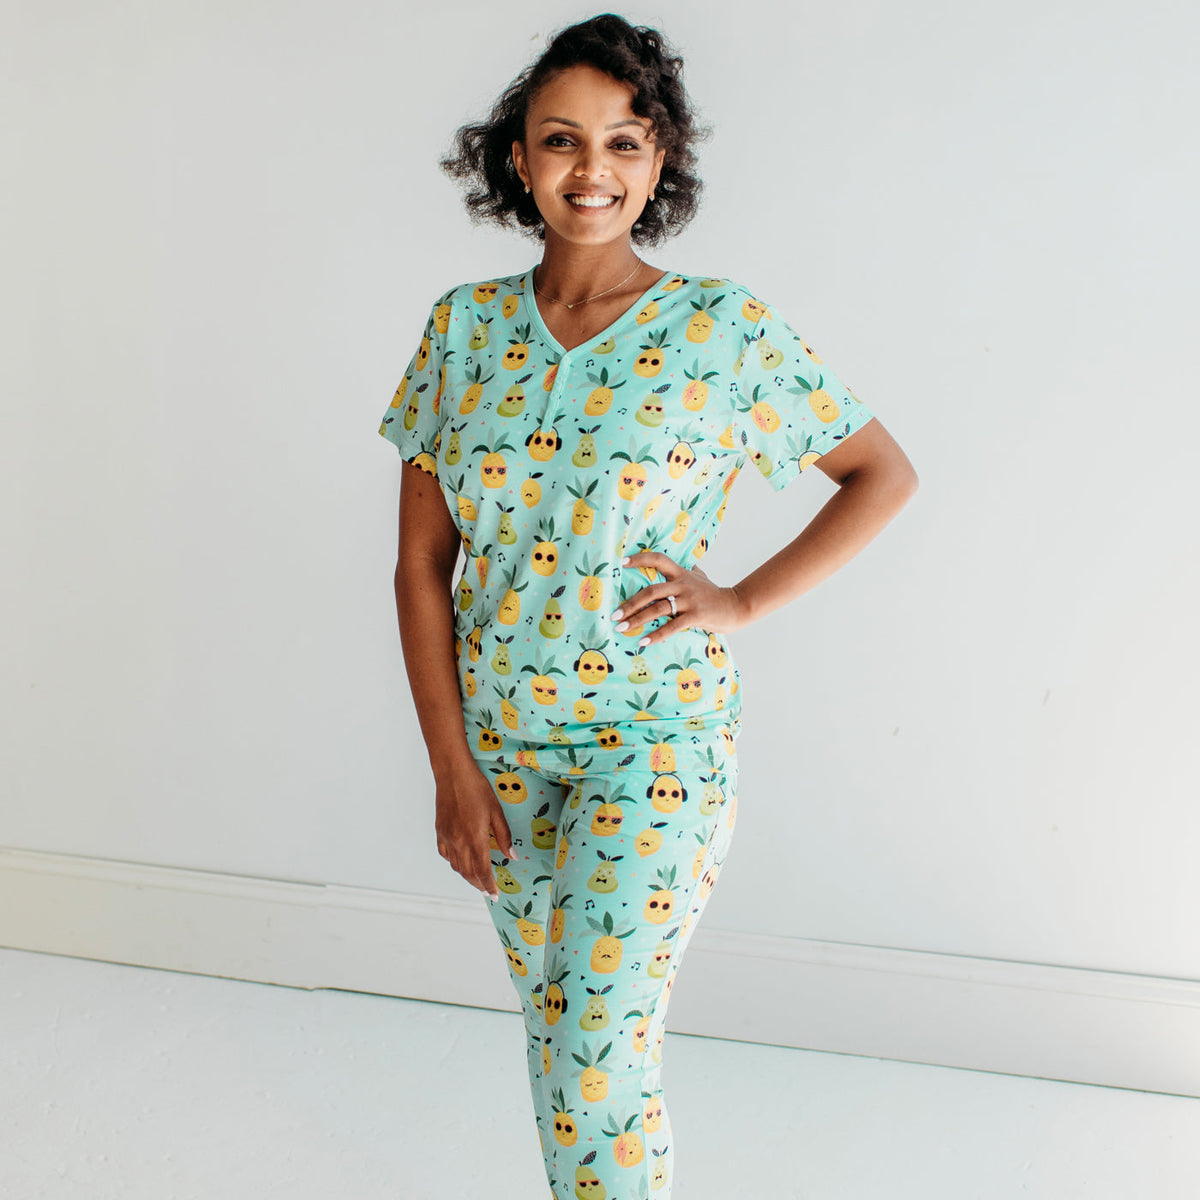 Discover the World's Most Comfortable Women's Pajamas! – Cool-jams